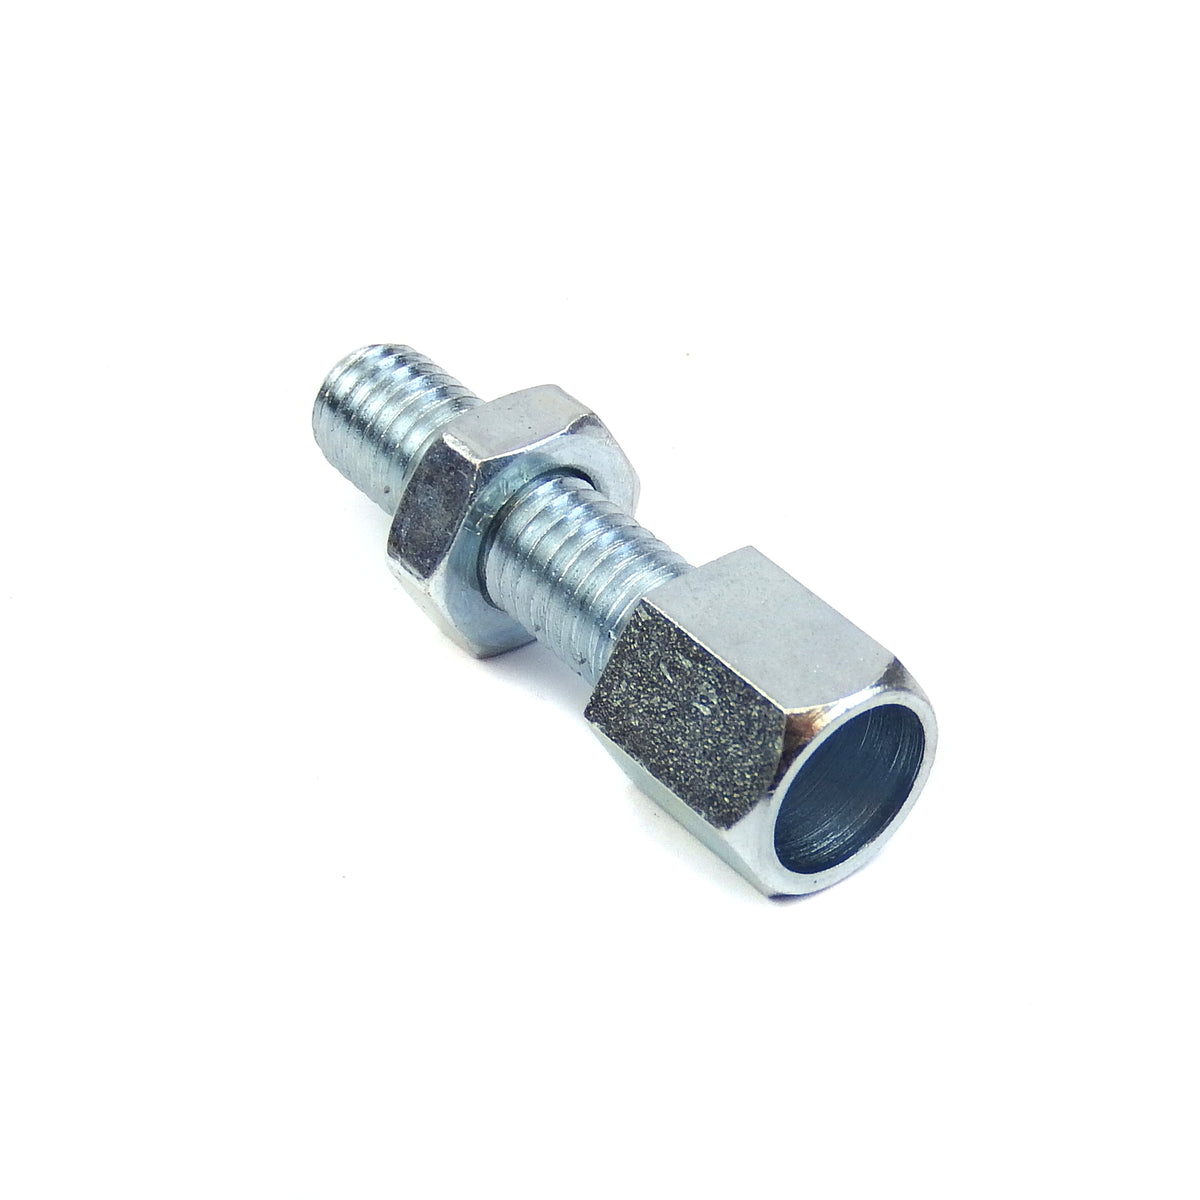 M8 Cable Adjuster - M8